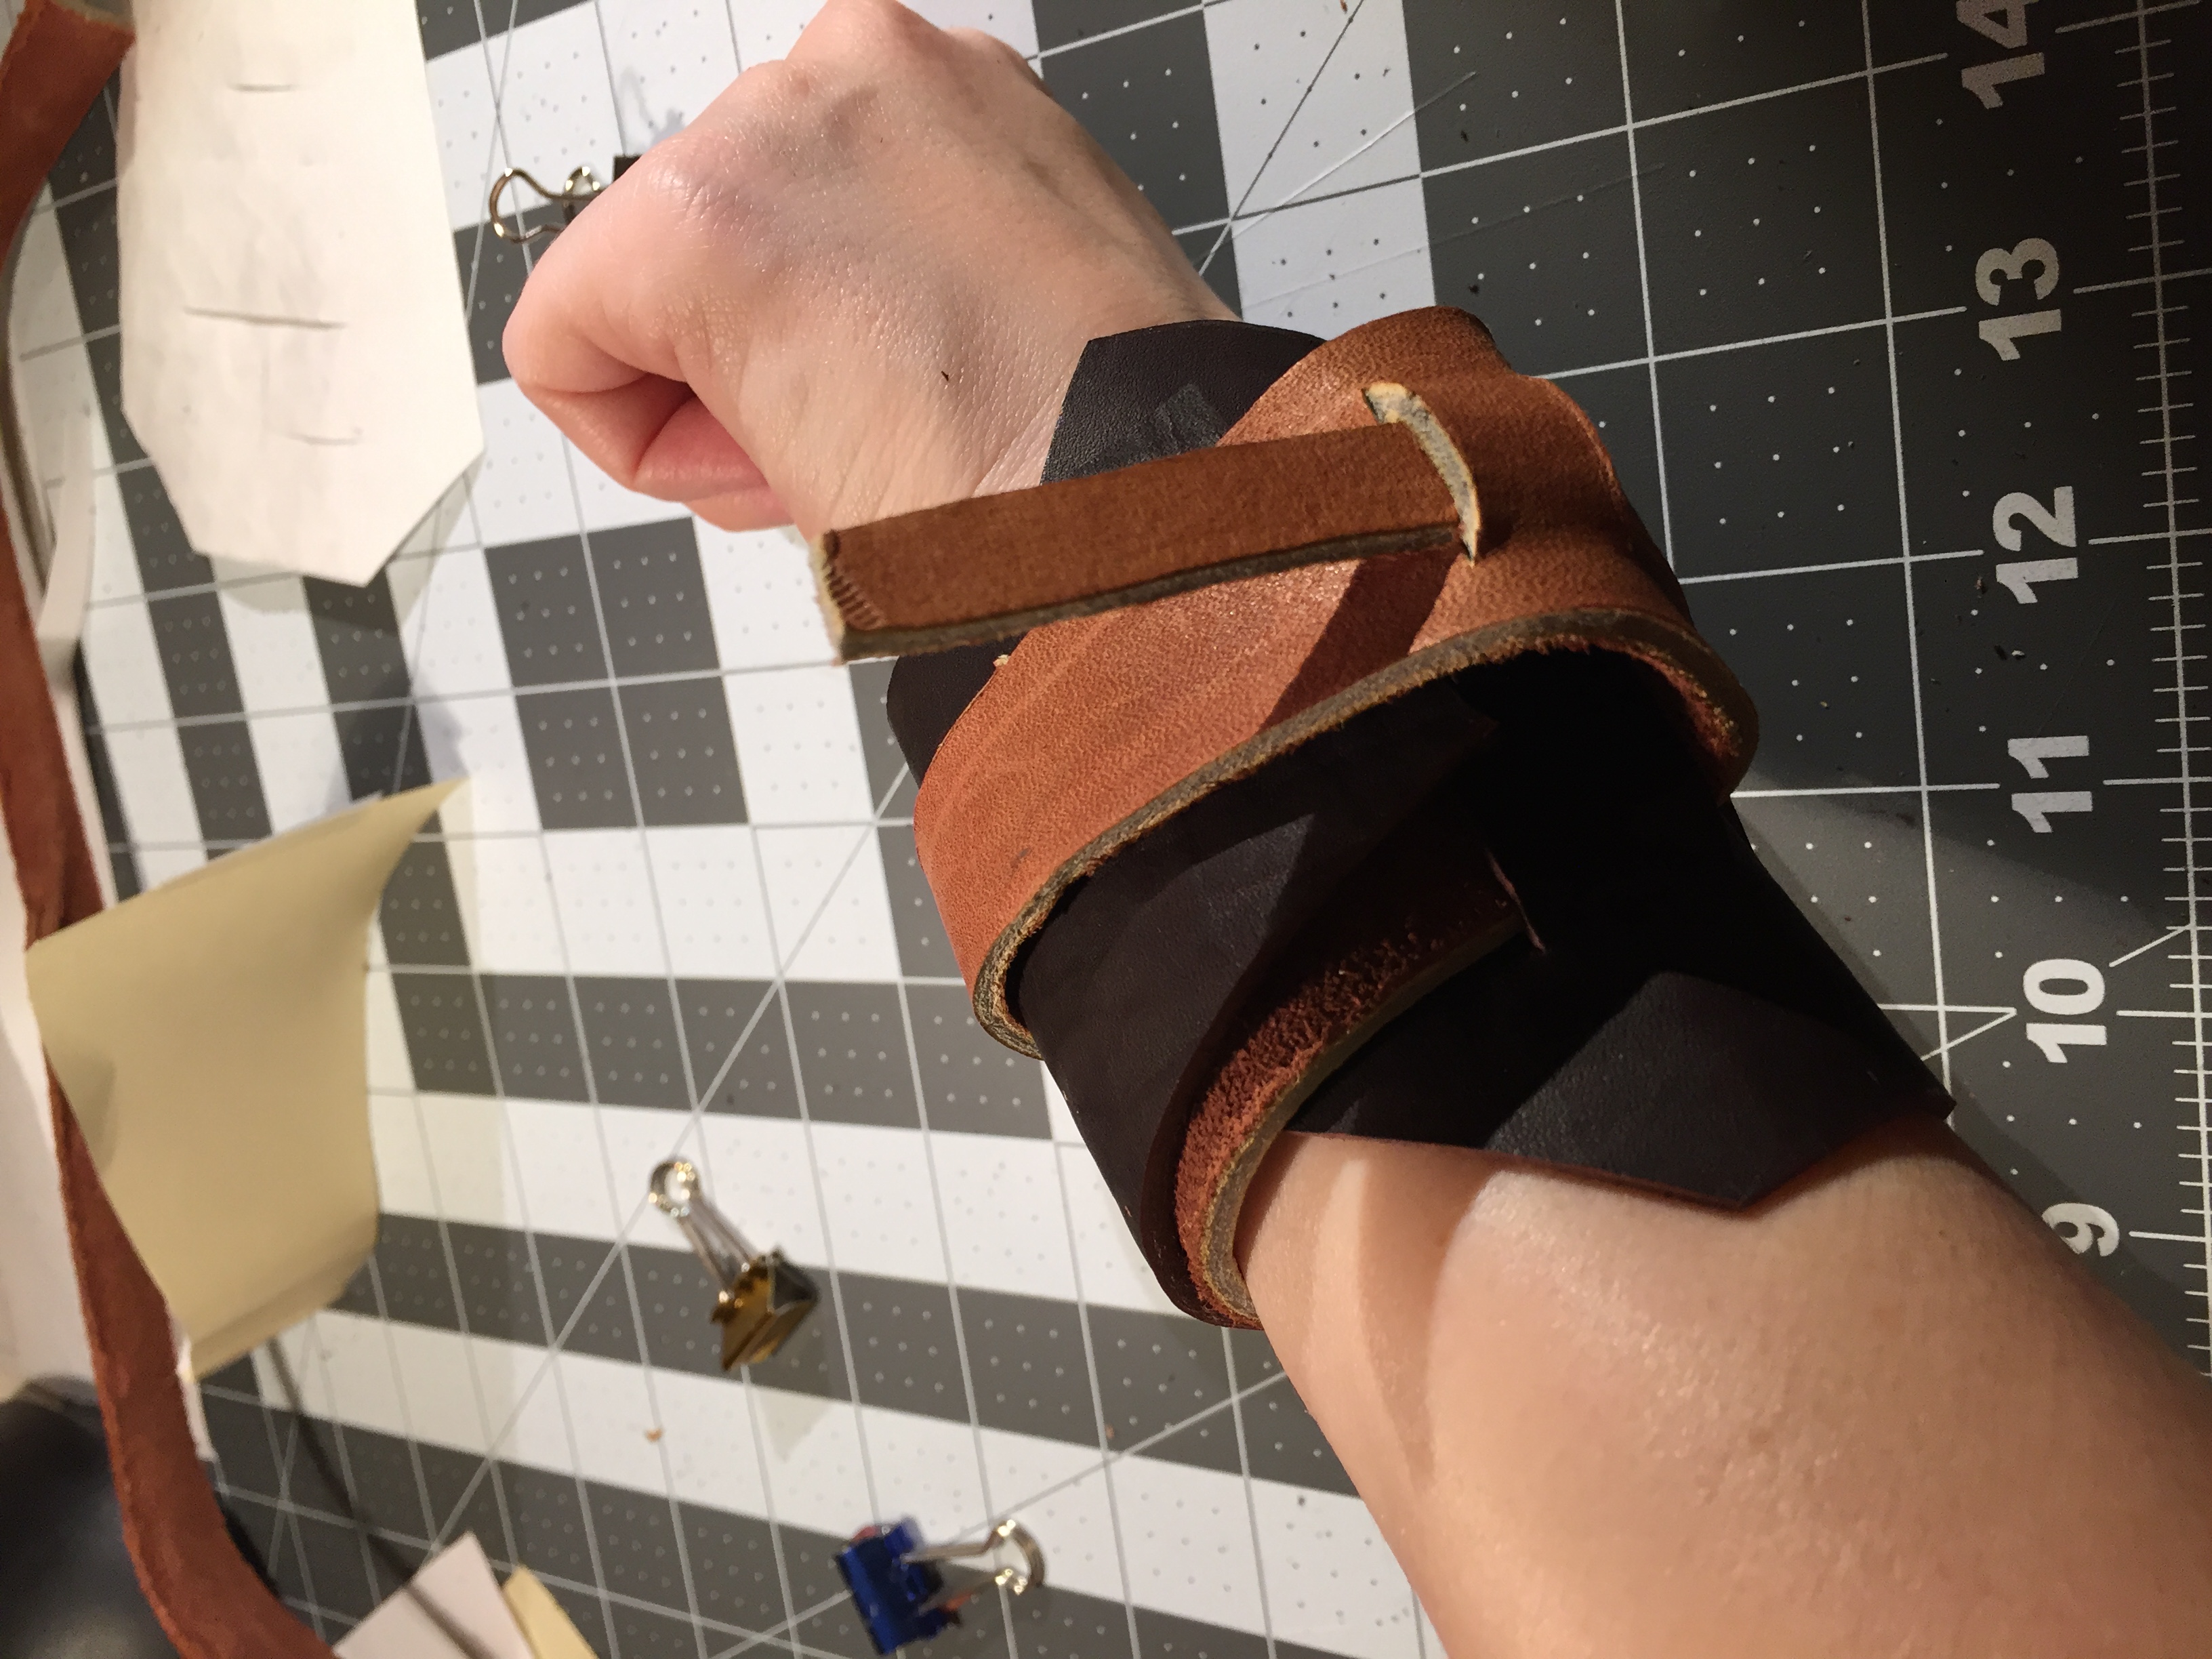 Bracer not really working...